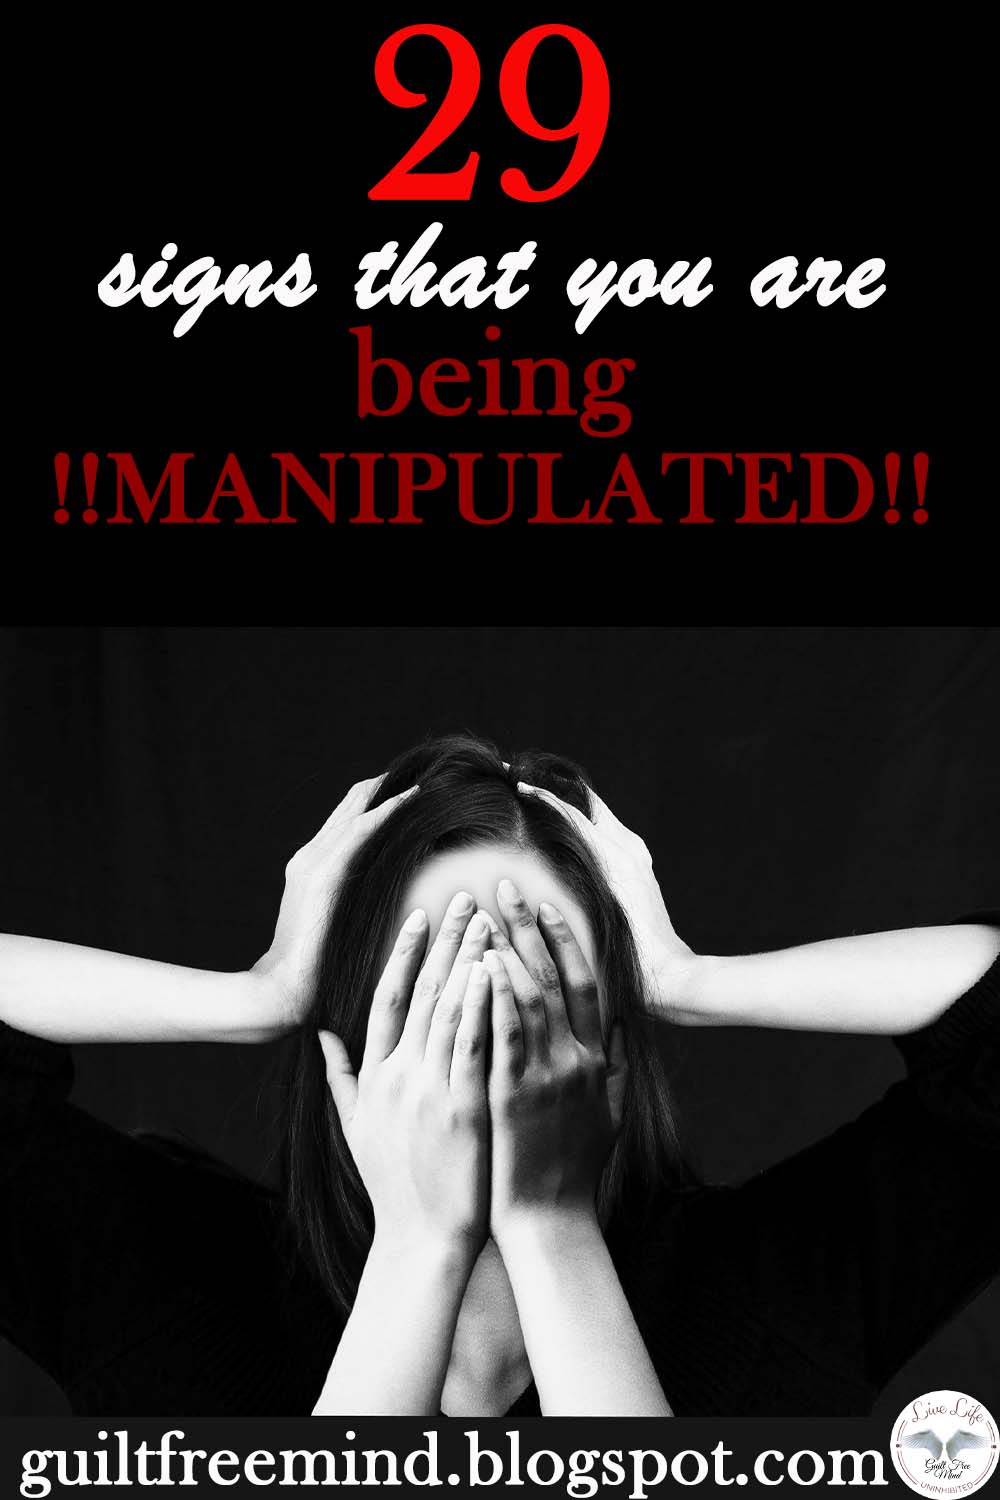 Signs that you are being manipulated